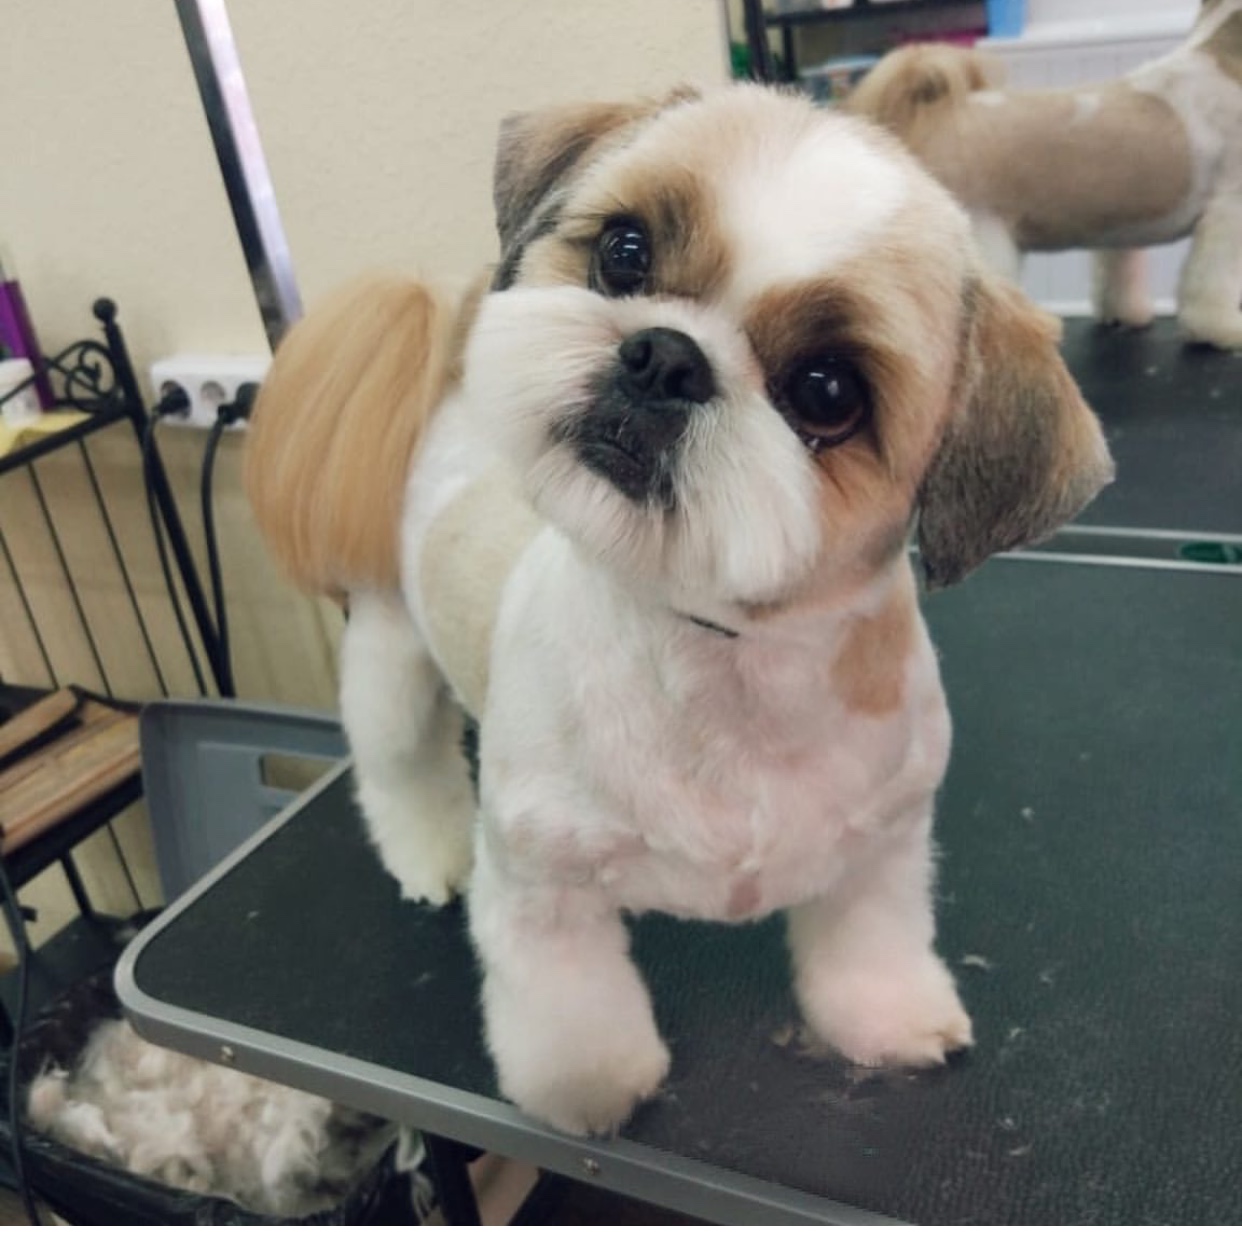 A freshly groomed Shih Tzu standing on top of the grooming table while tilting its head